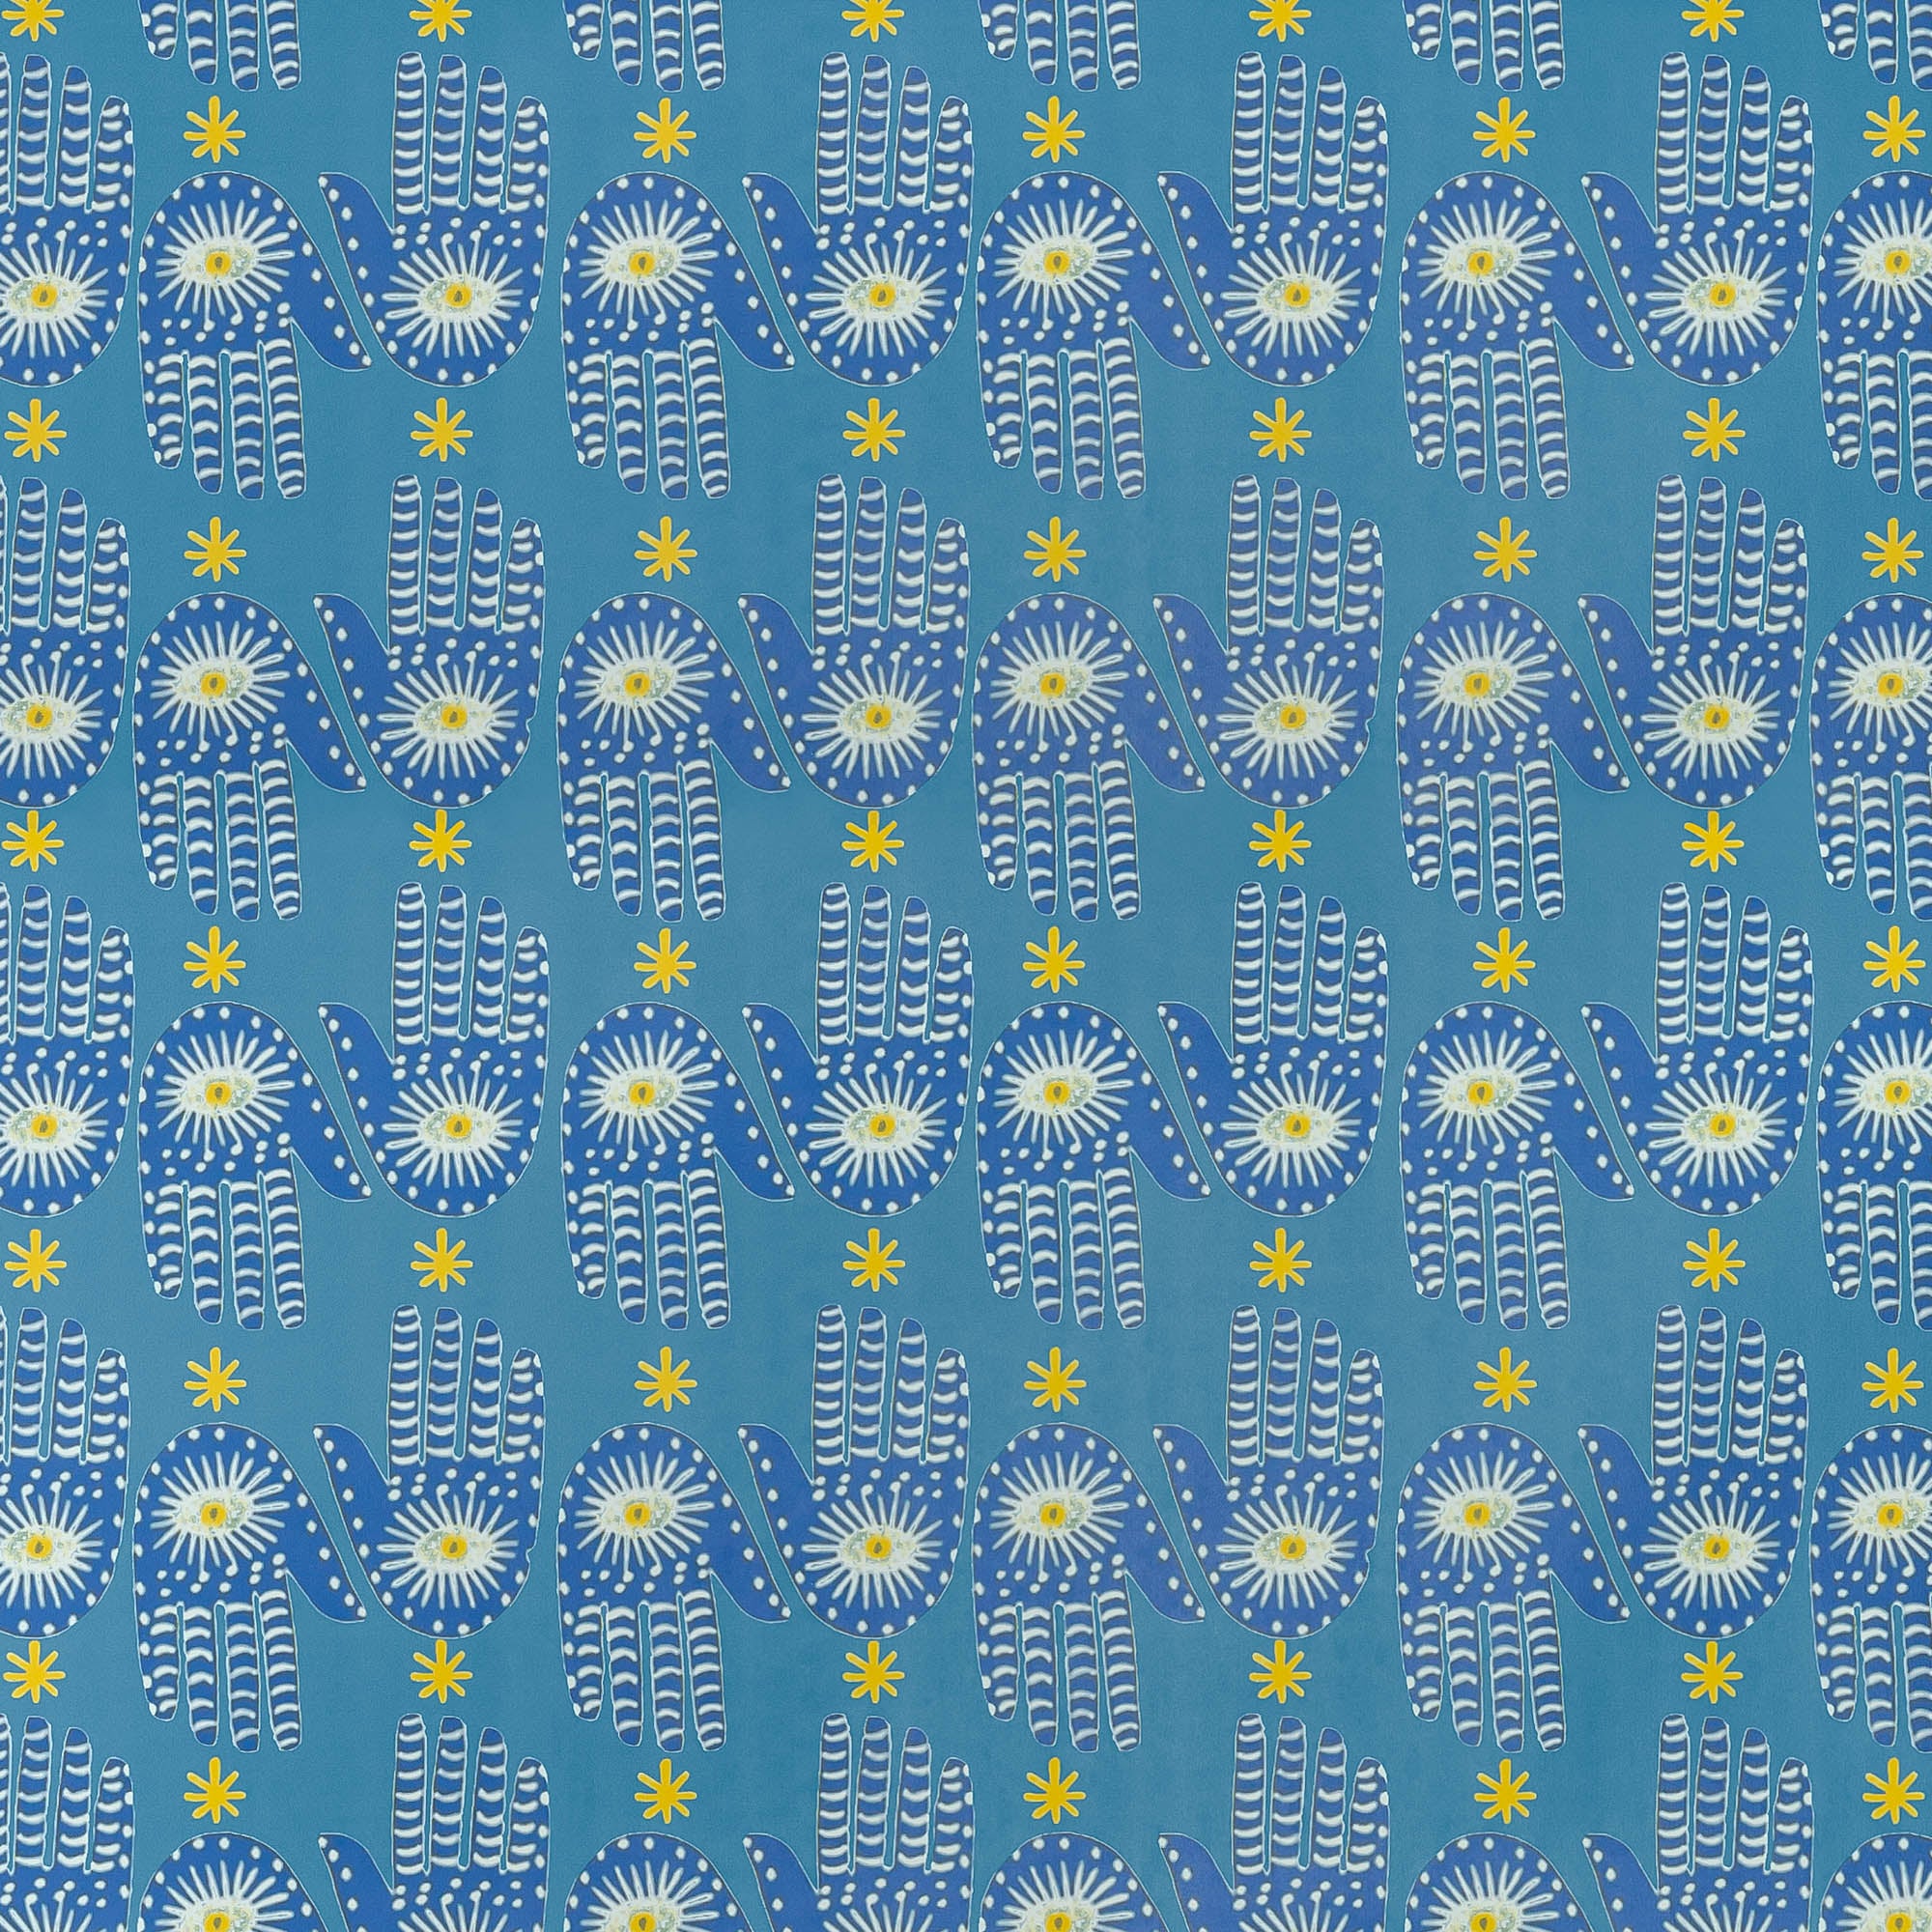 Detail of wallpaper in a playful hamsa hand print in white, navy and yellow on a blue field.